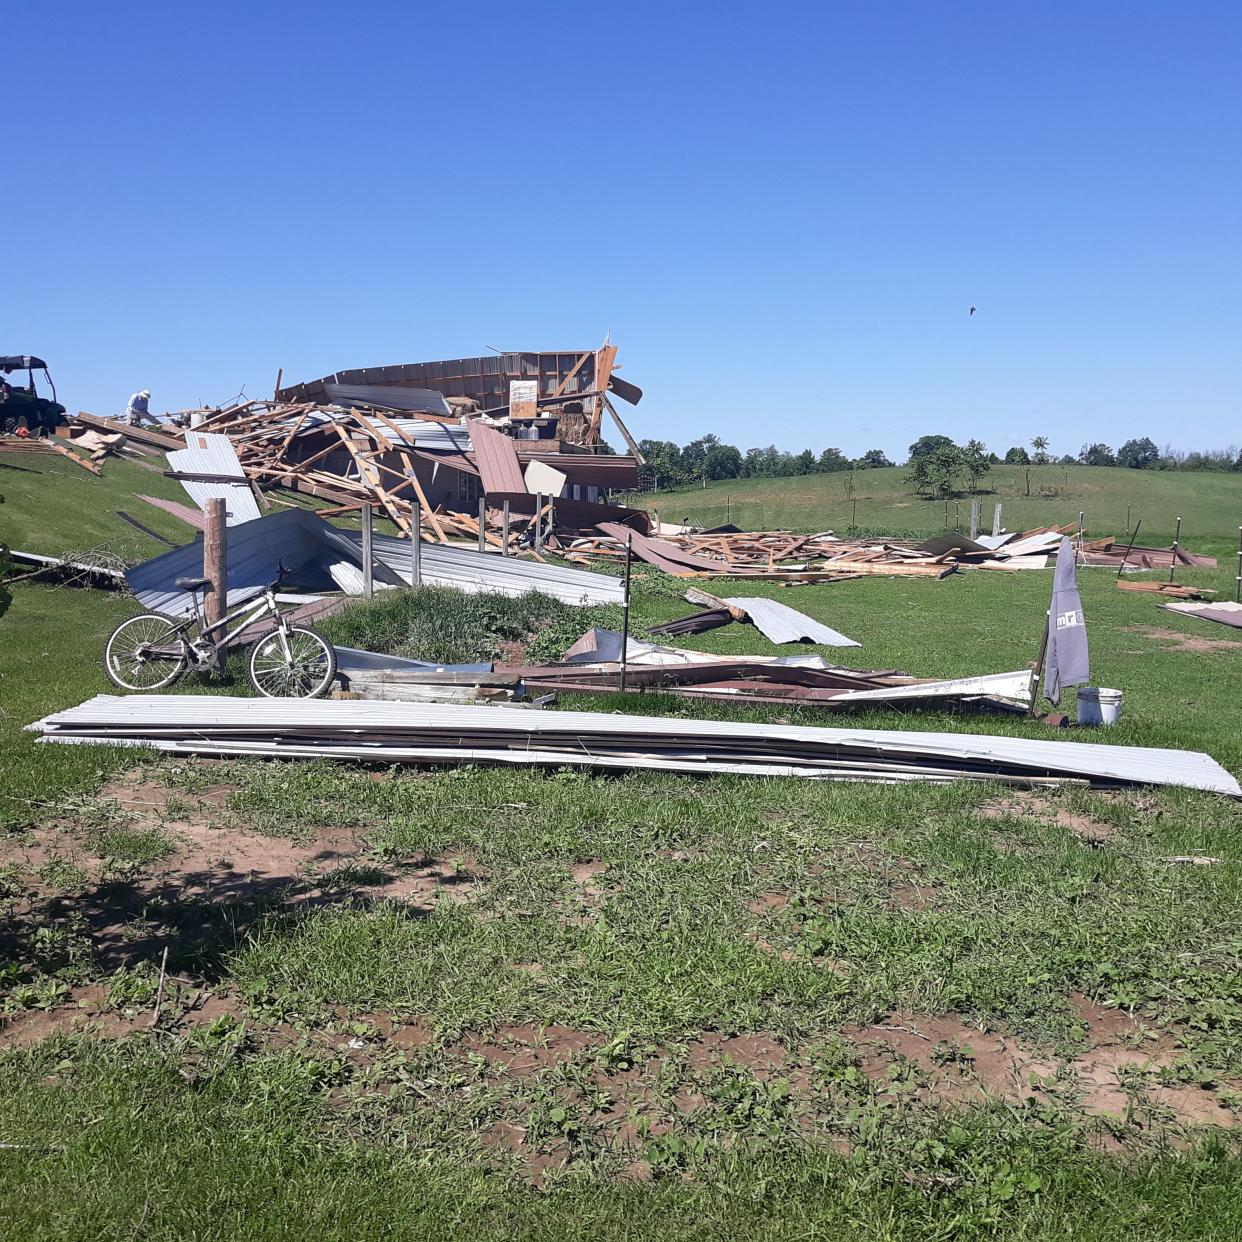 A building was destroyed by a tornado near Navarino near the border of Shawano and Outagamie counties on June 15.